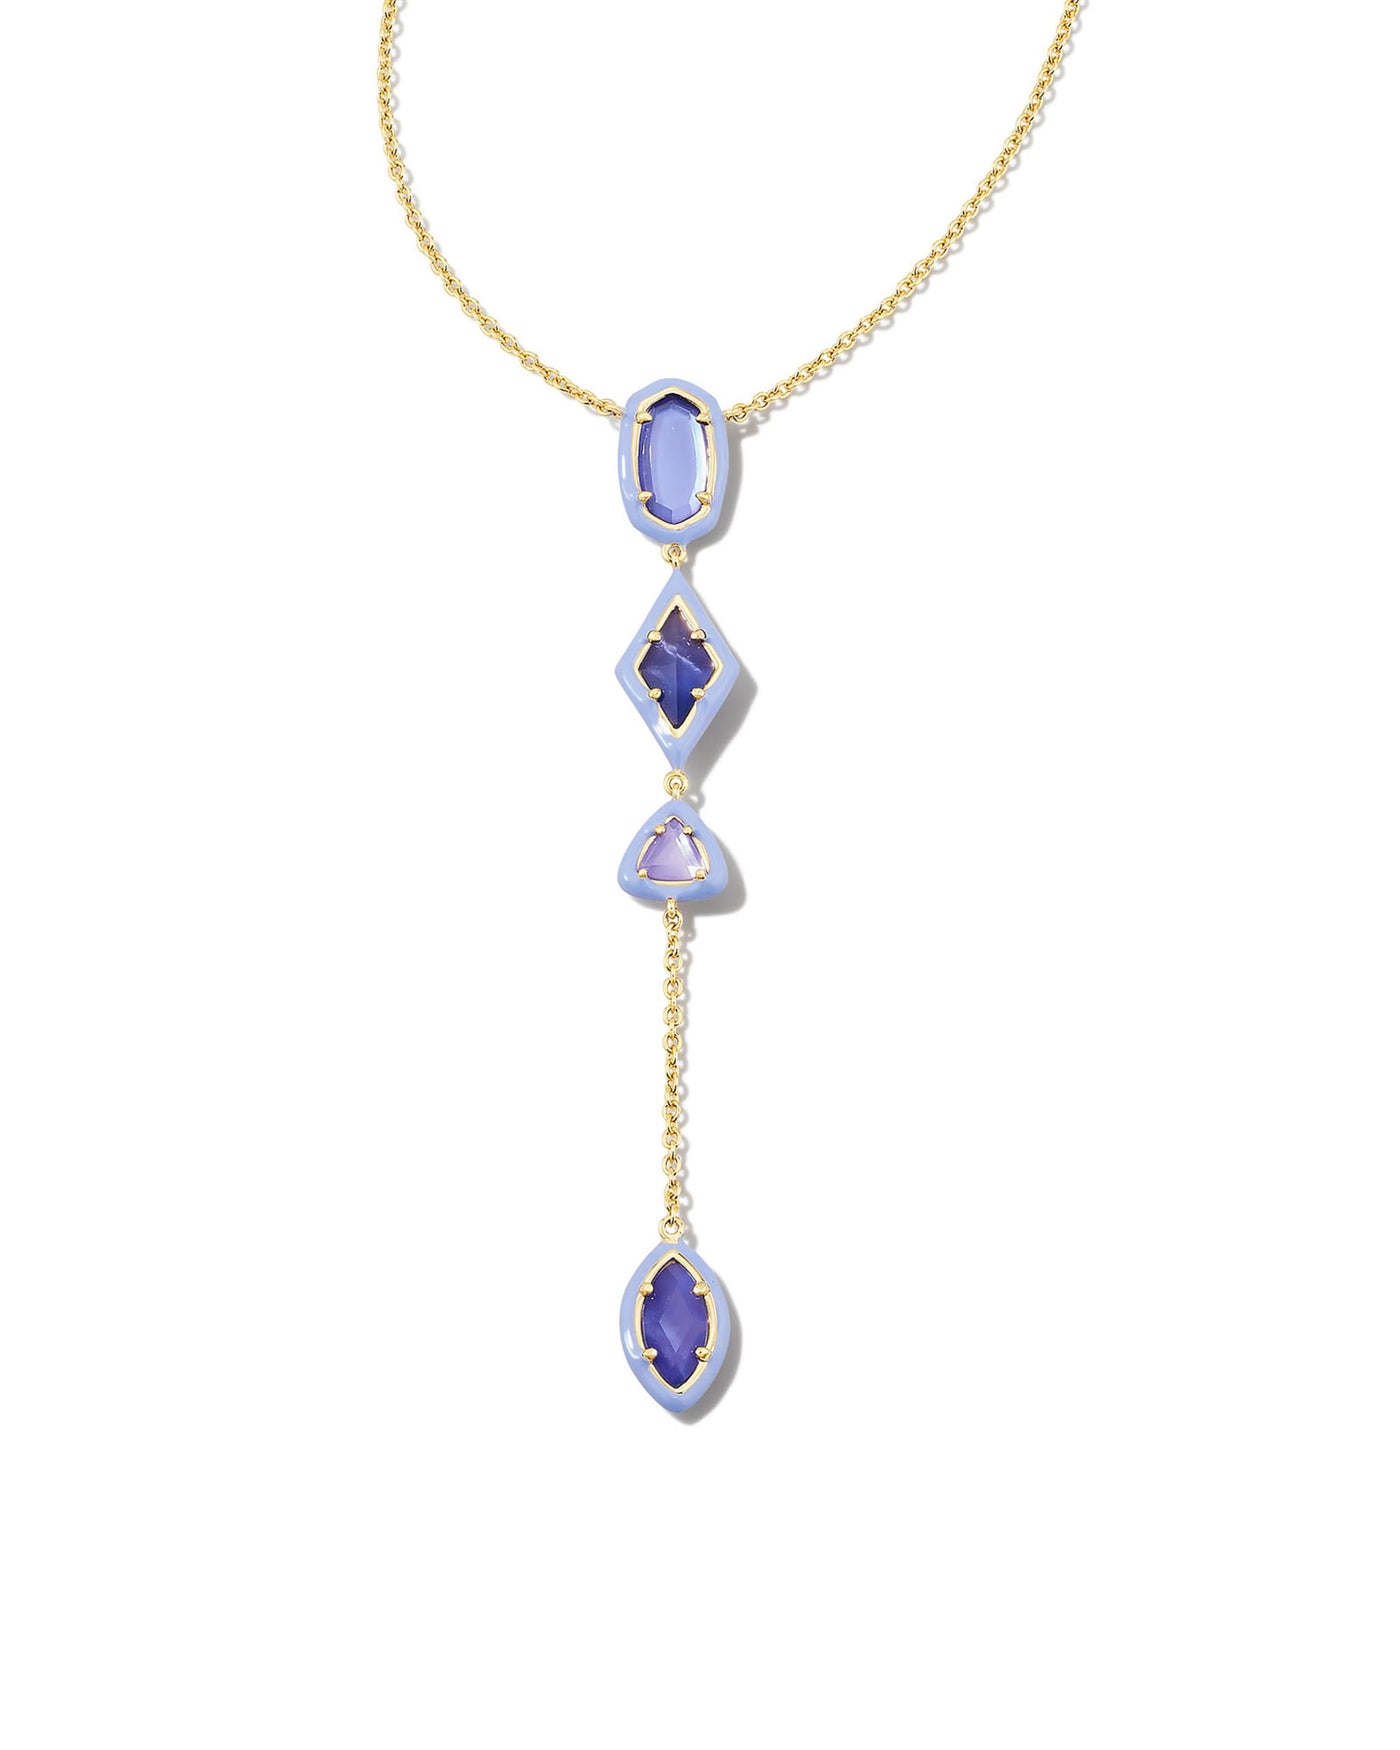 Gold Tone Necklace Featuring Ombre Lavendar Mix by Kendra Scott